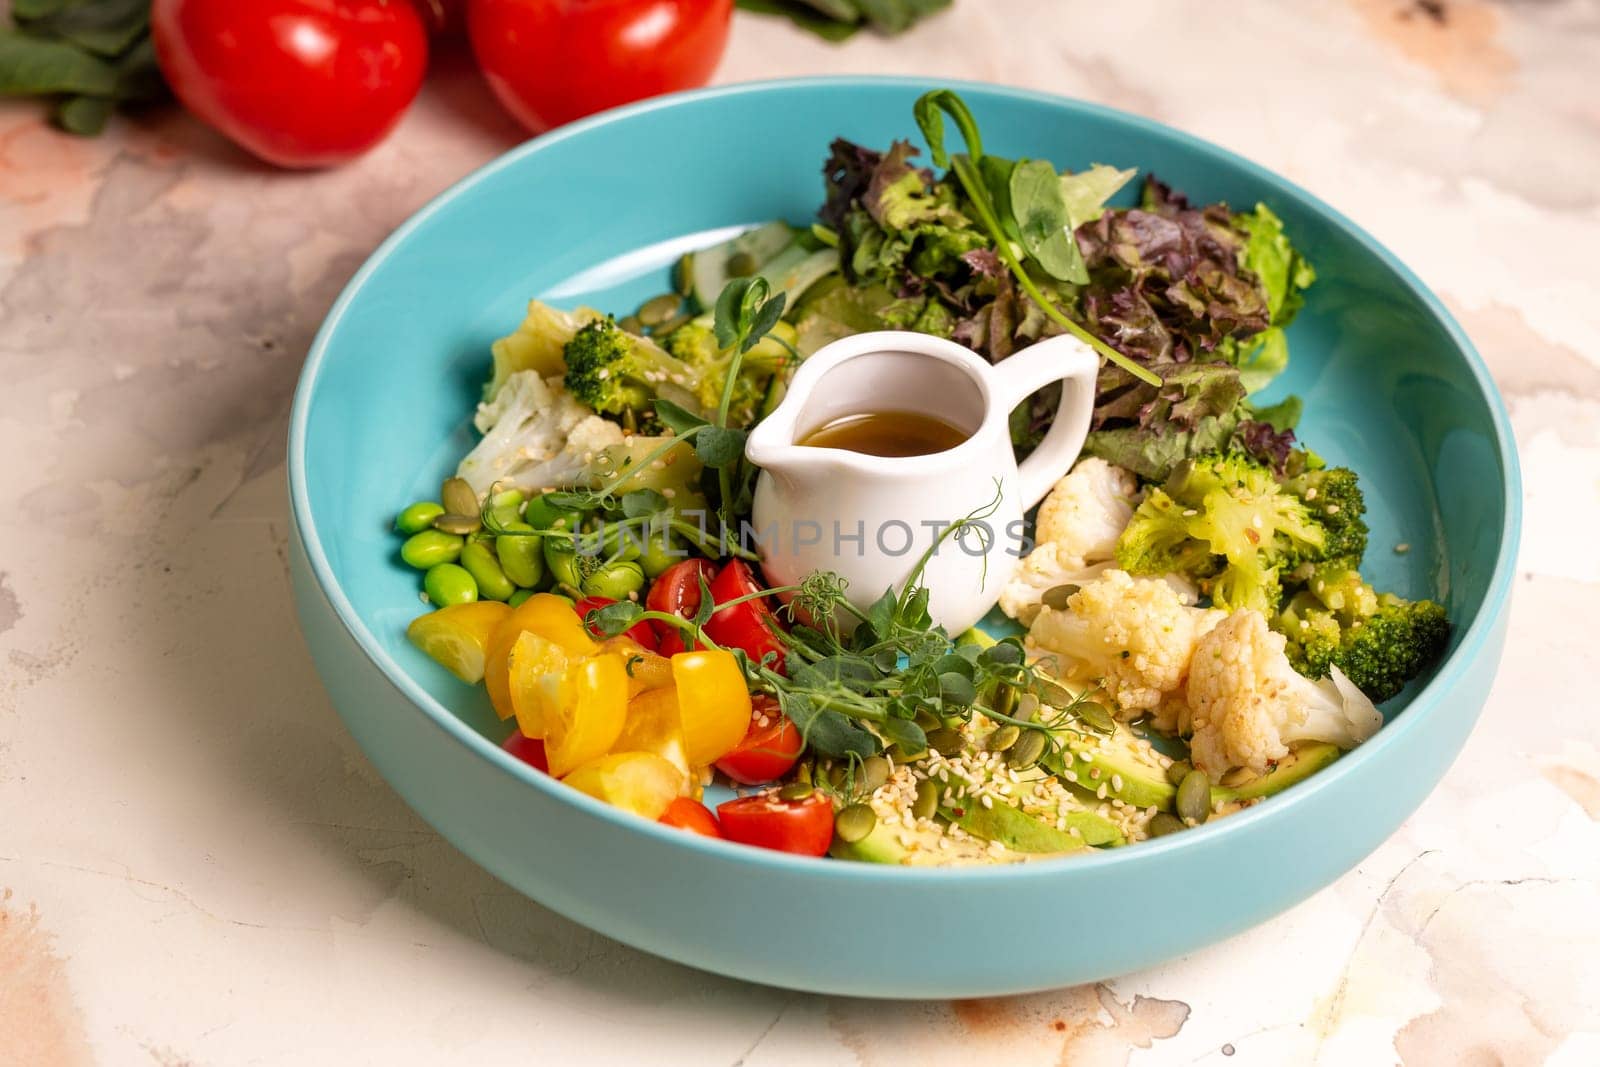 A Balanced Diet Plate With Vegetables, Salad And Dressing. Salad Bowl. by Pukhovskiy